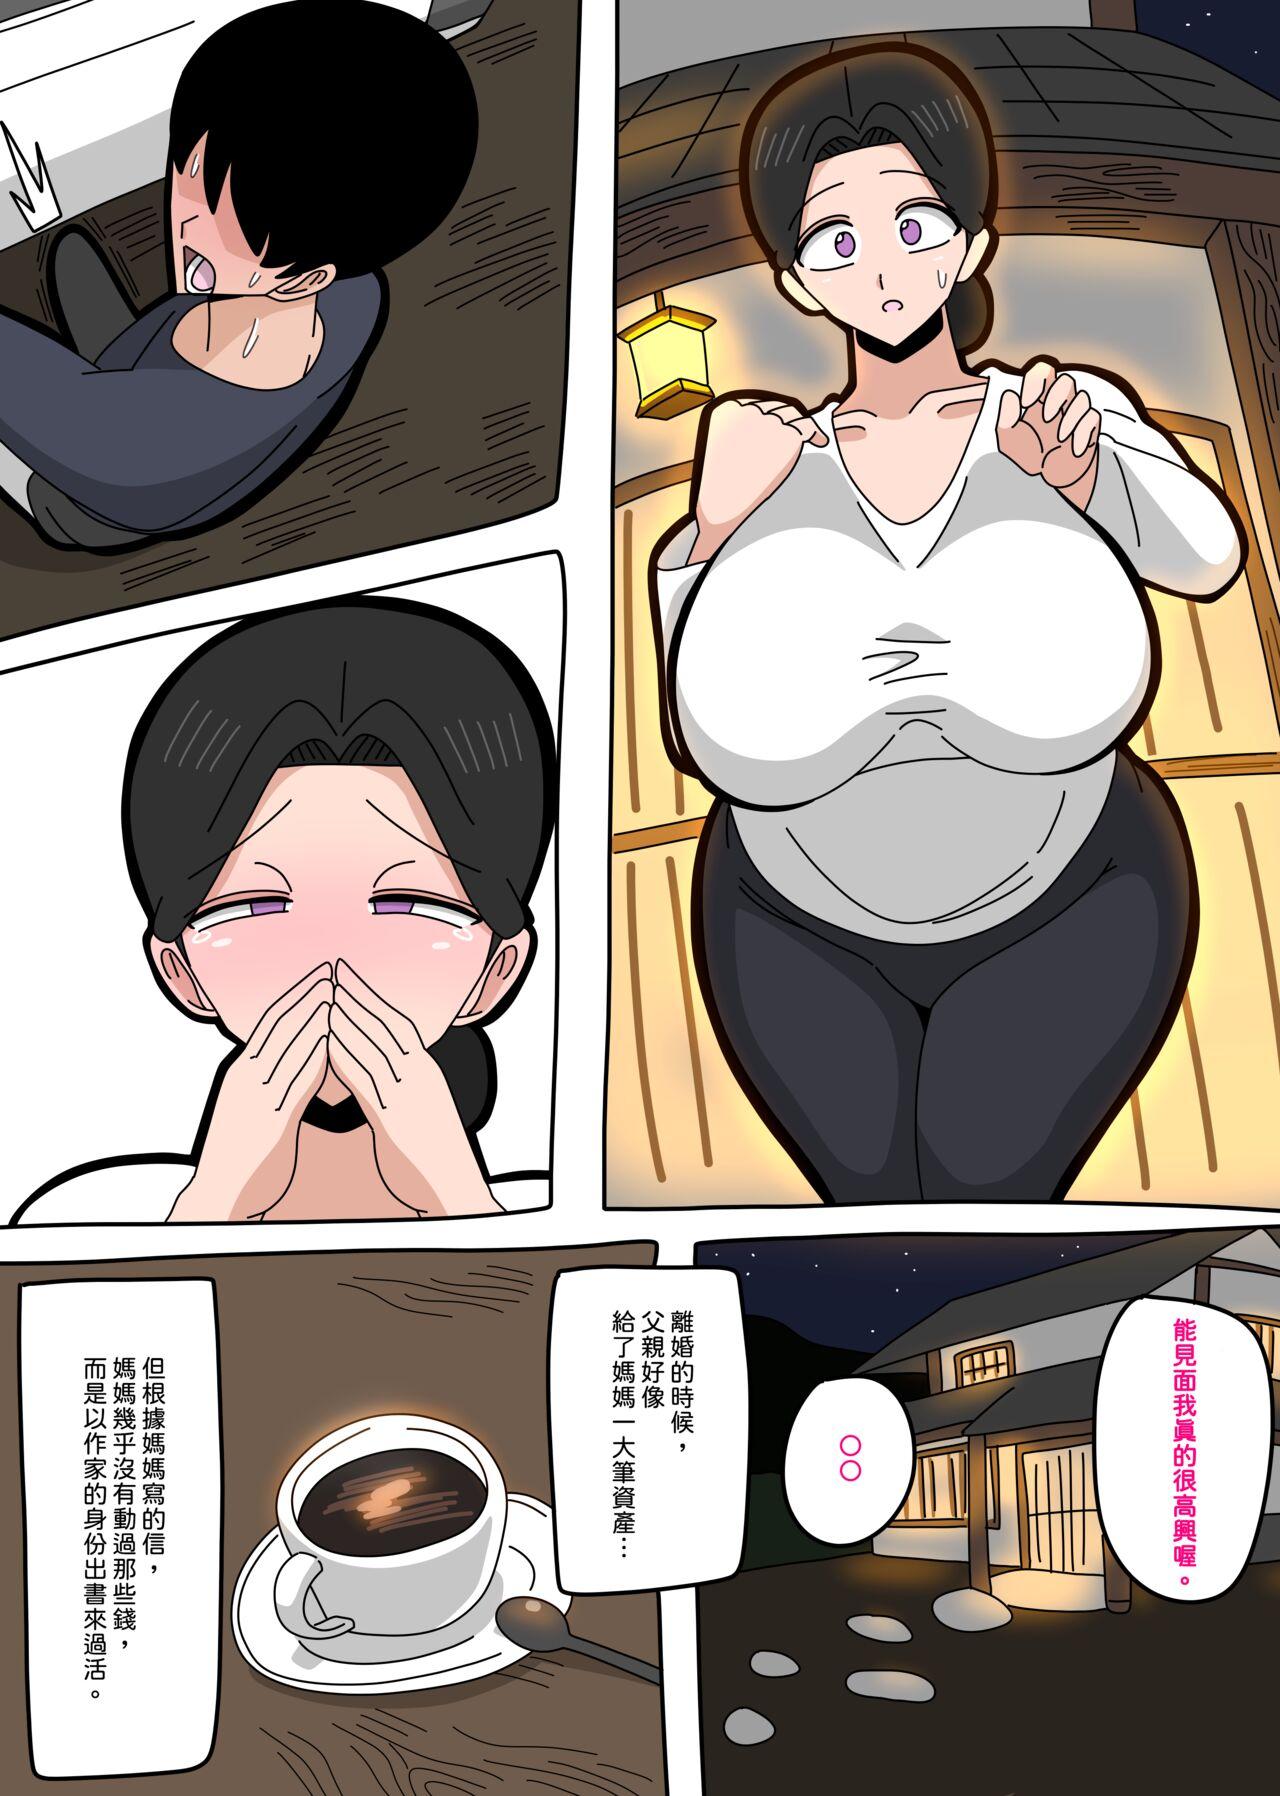 Pendeja [18master] 2023-5-24 Meeting mom again after a long separation | 與媽媽重逢… [Chinese][興趣使然的個人機翻] - Original Lezdom - Page 2